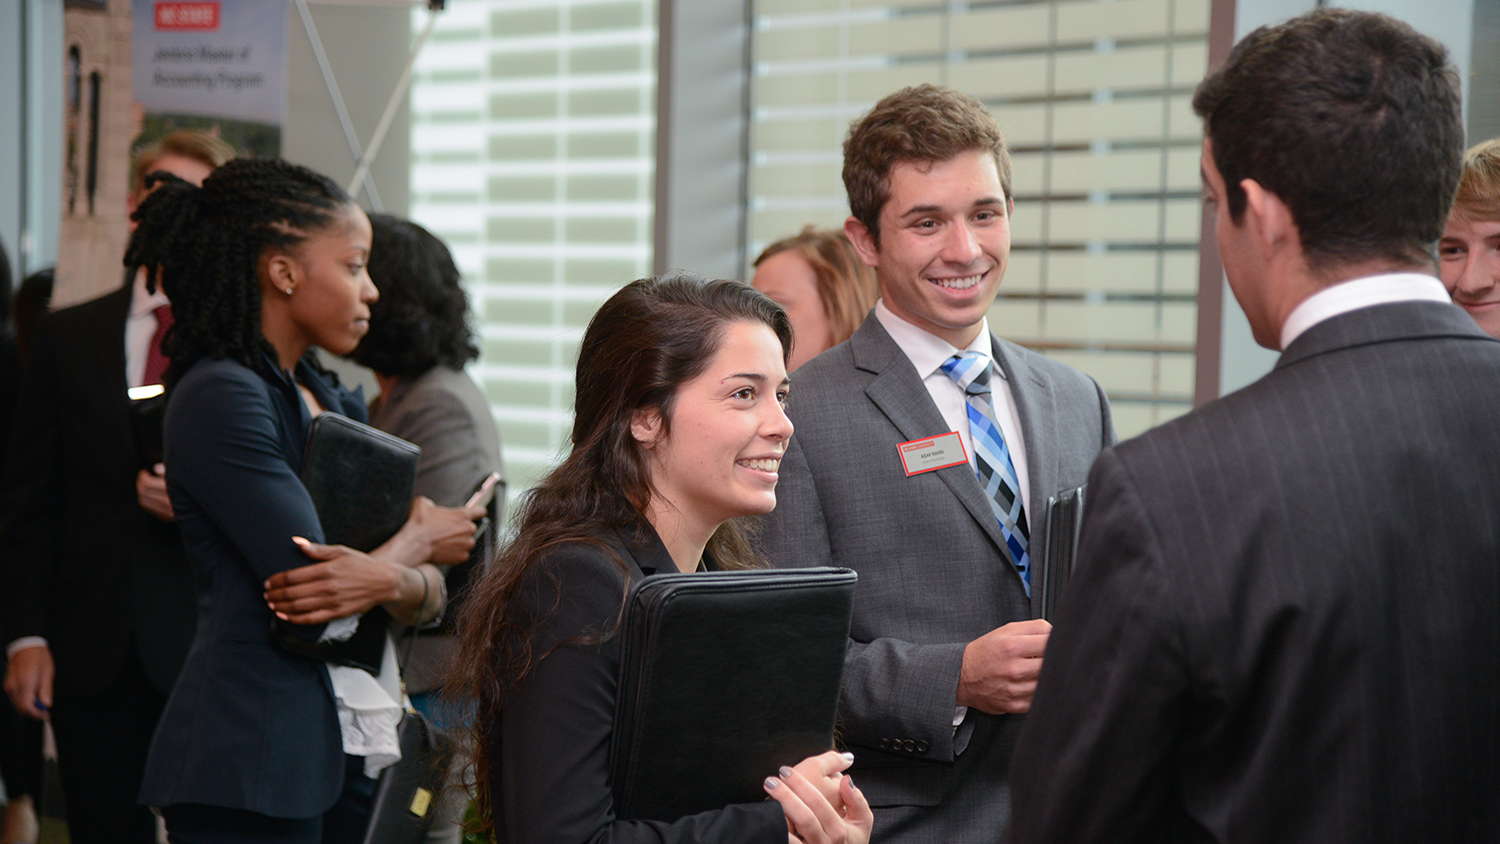 NC State students networking with recruiters